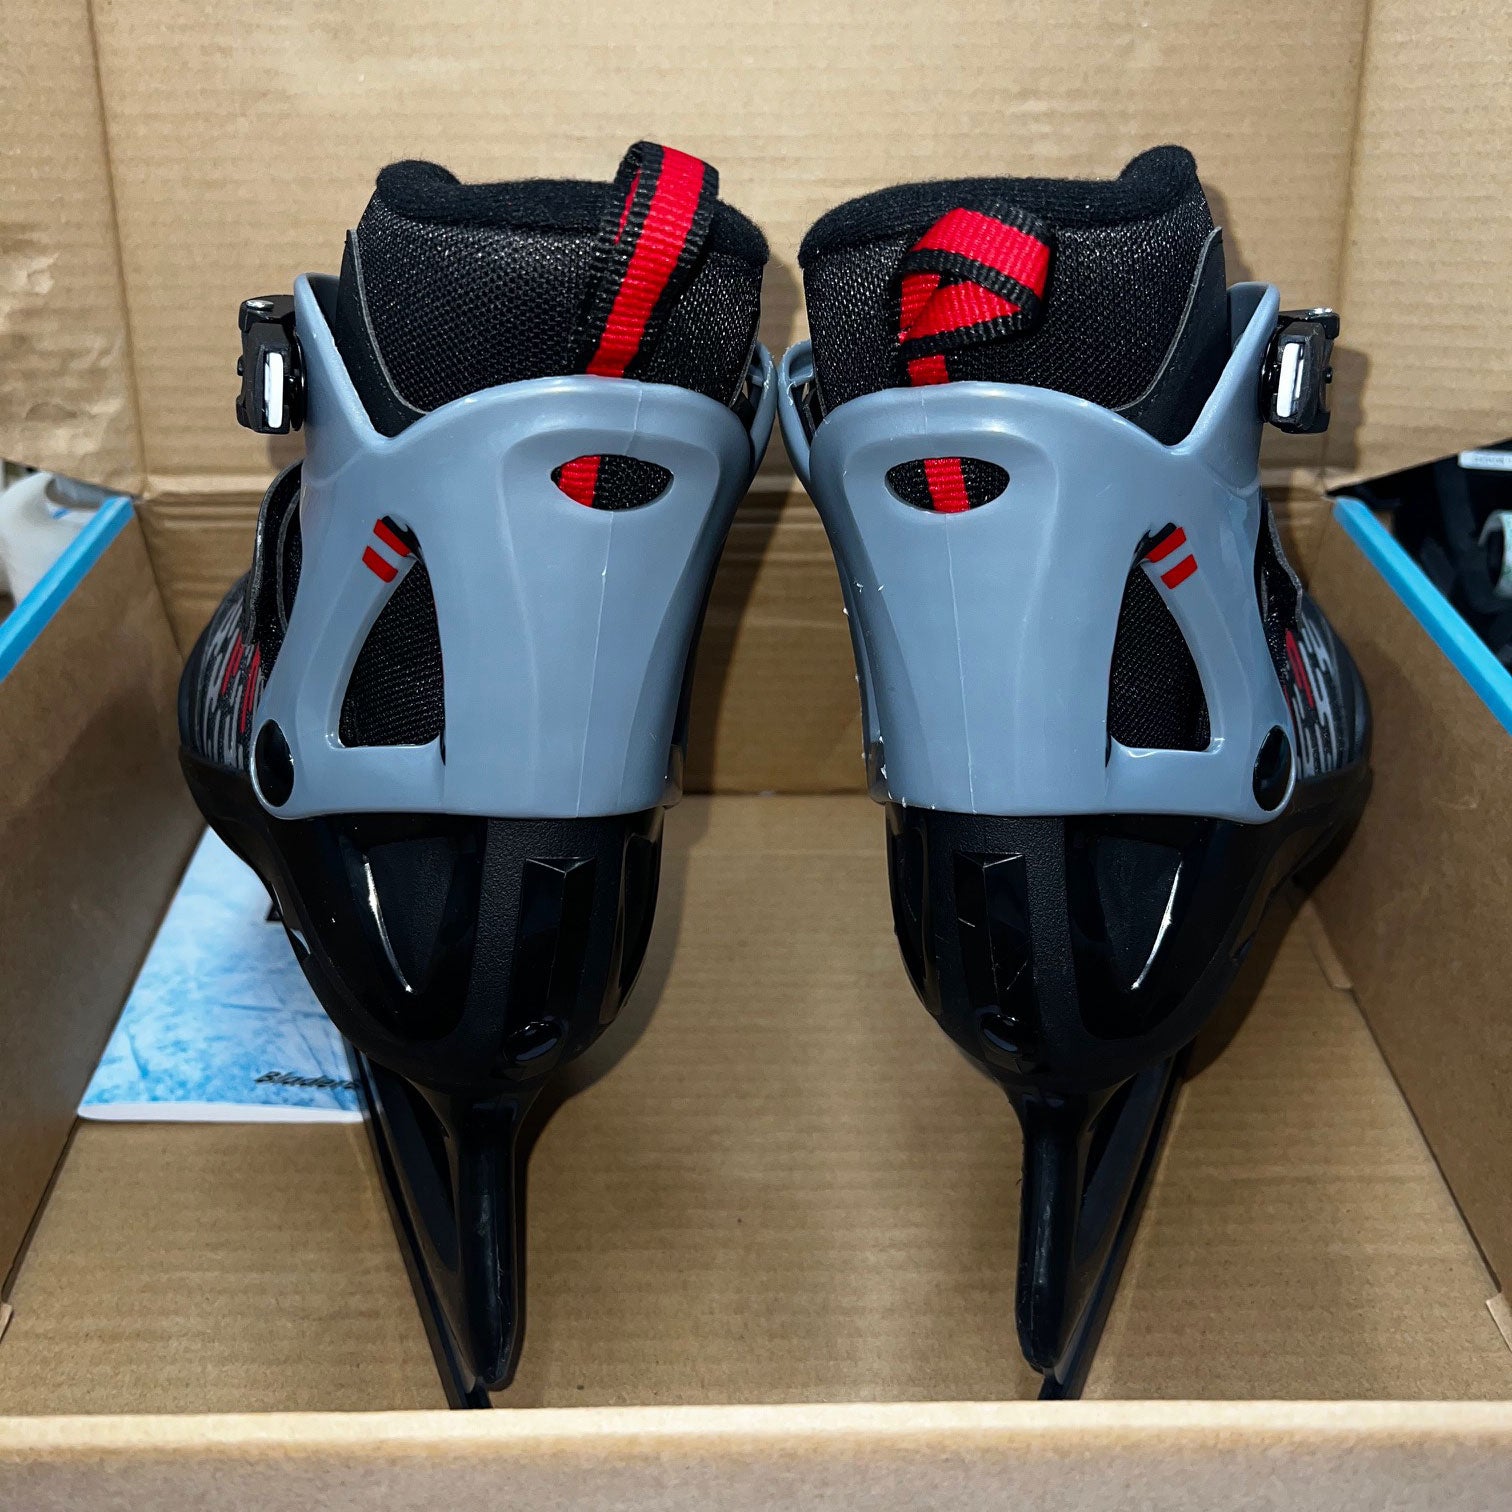 Bladerunner by RB Micro Ice Boys Adj. Ice Skates - (Moderately Used Size 2-5)